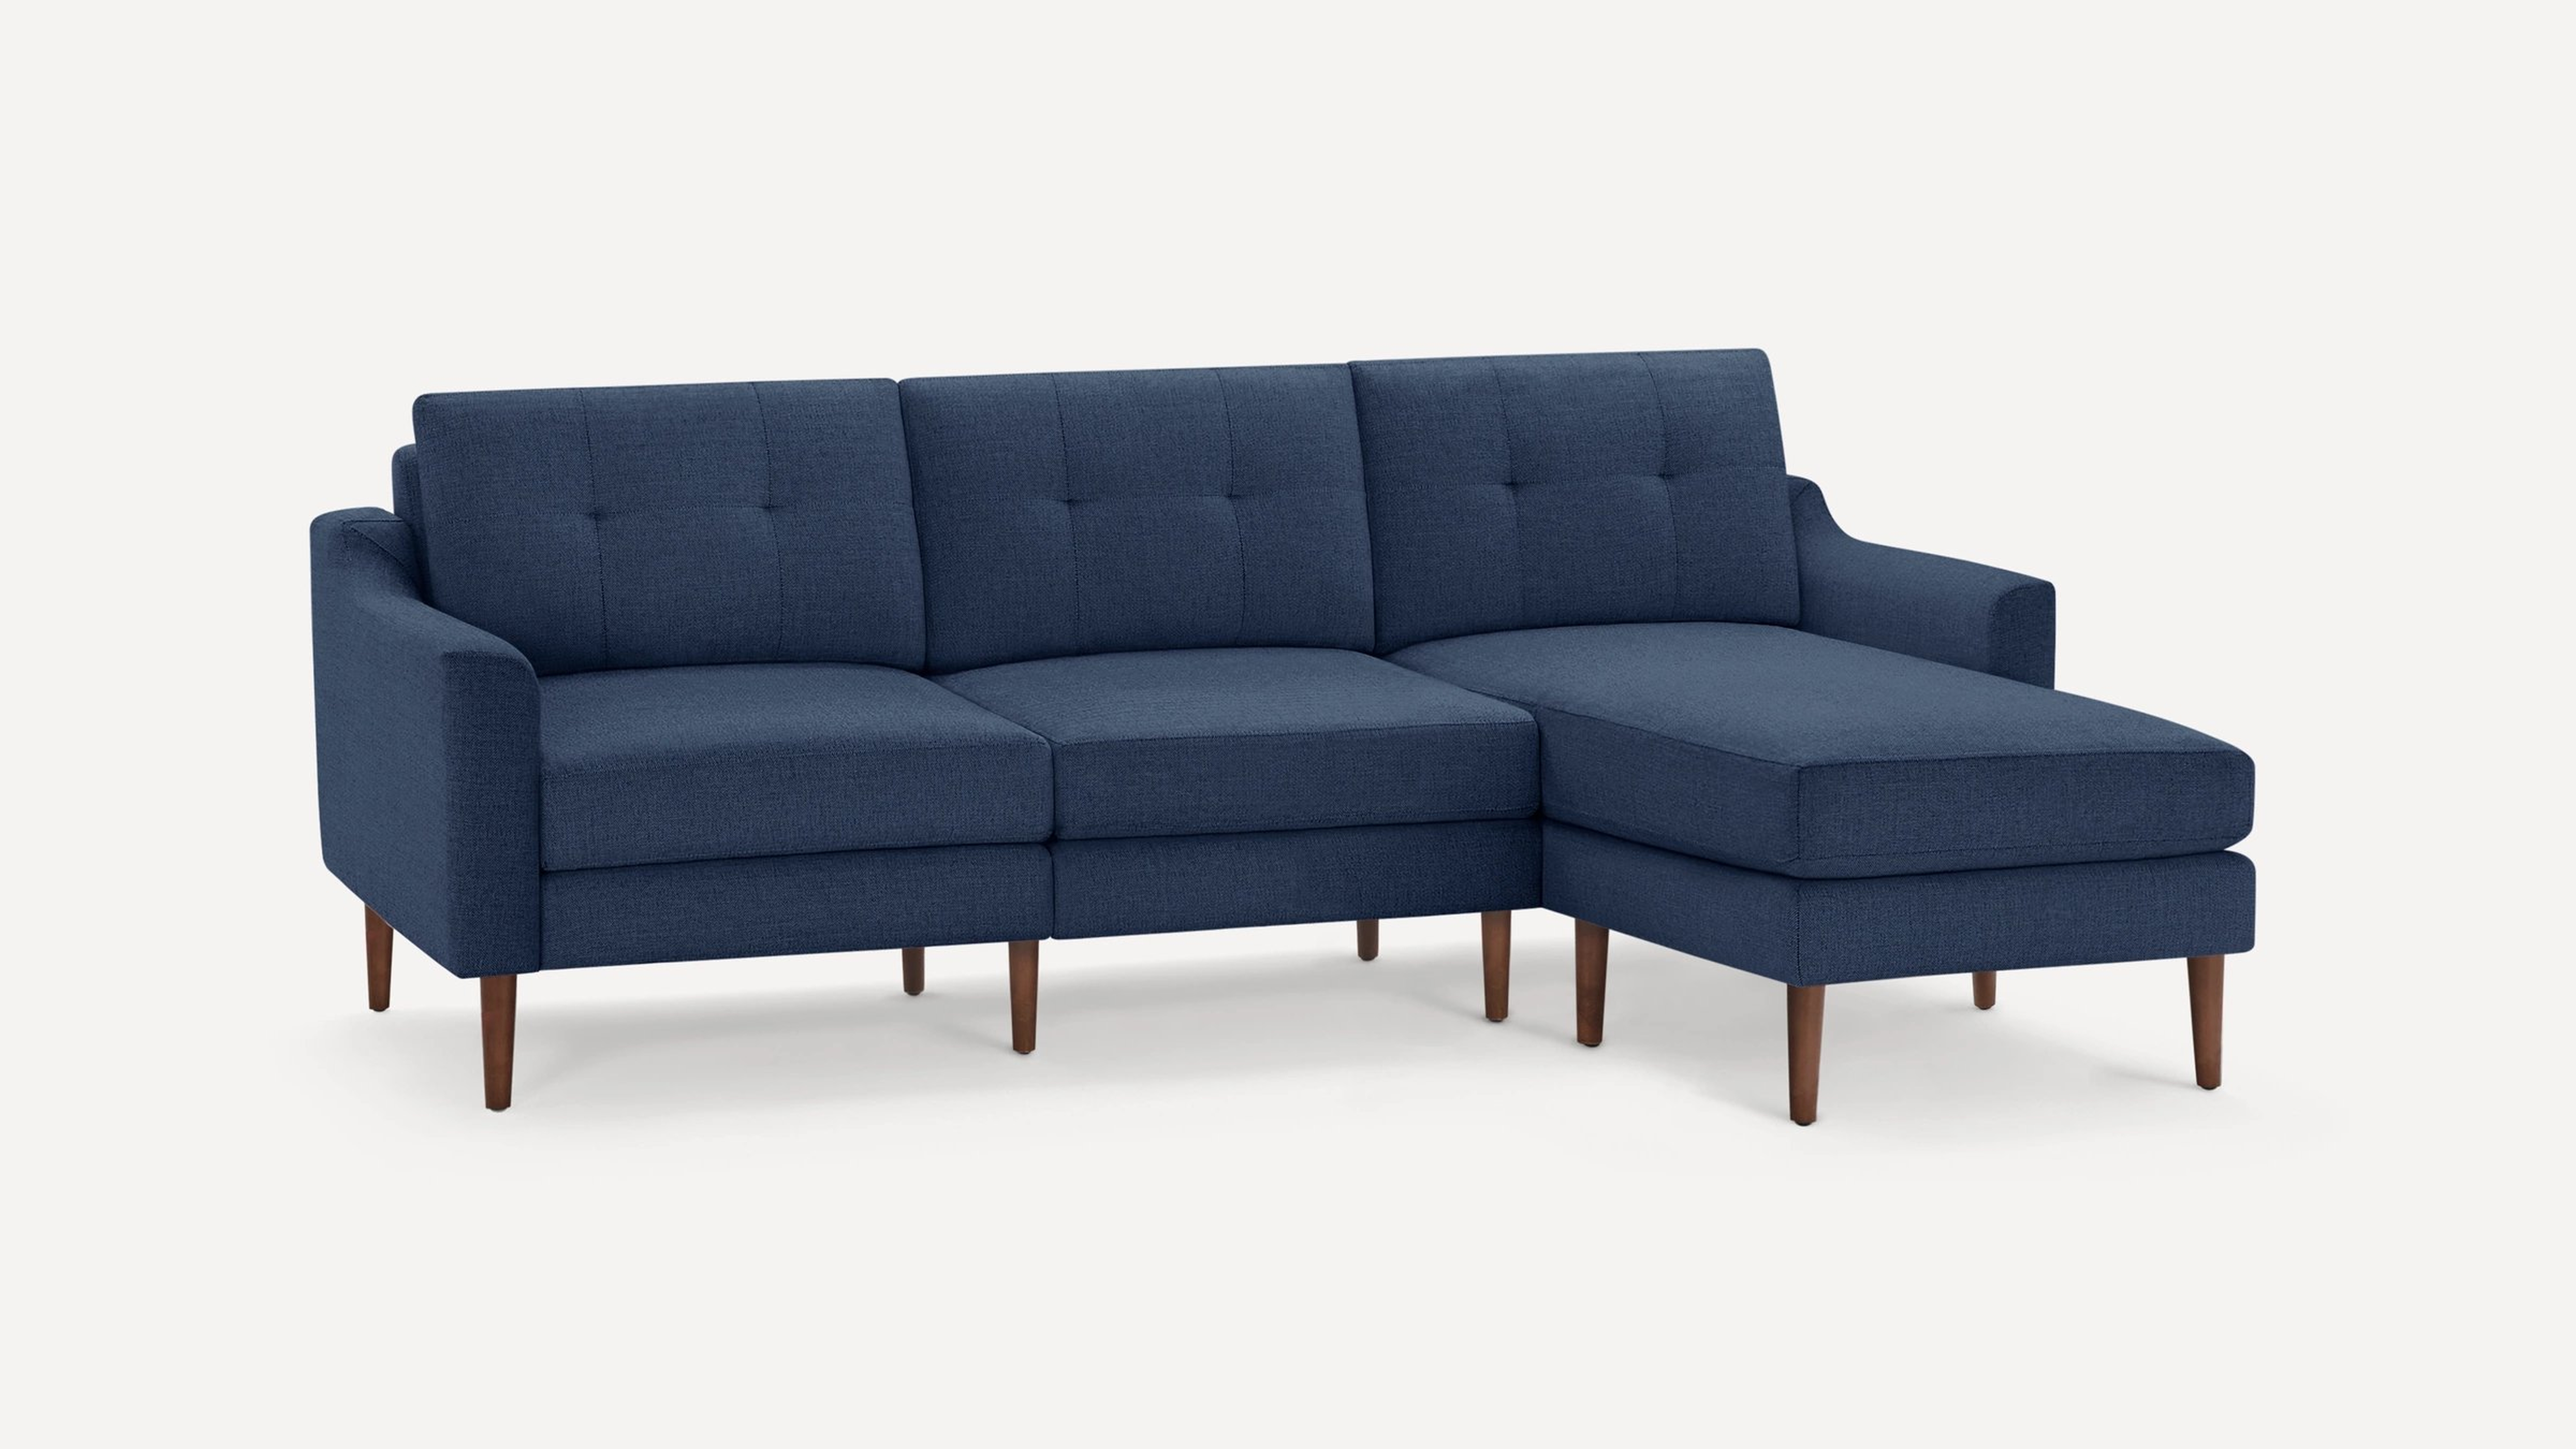 Burrow Navy Blue Sectional Sofa, 3 Seater, Sloped Arms - Burrow